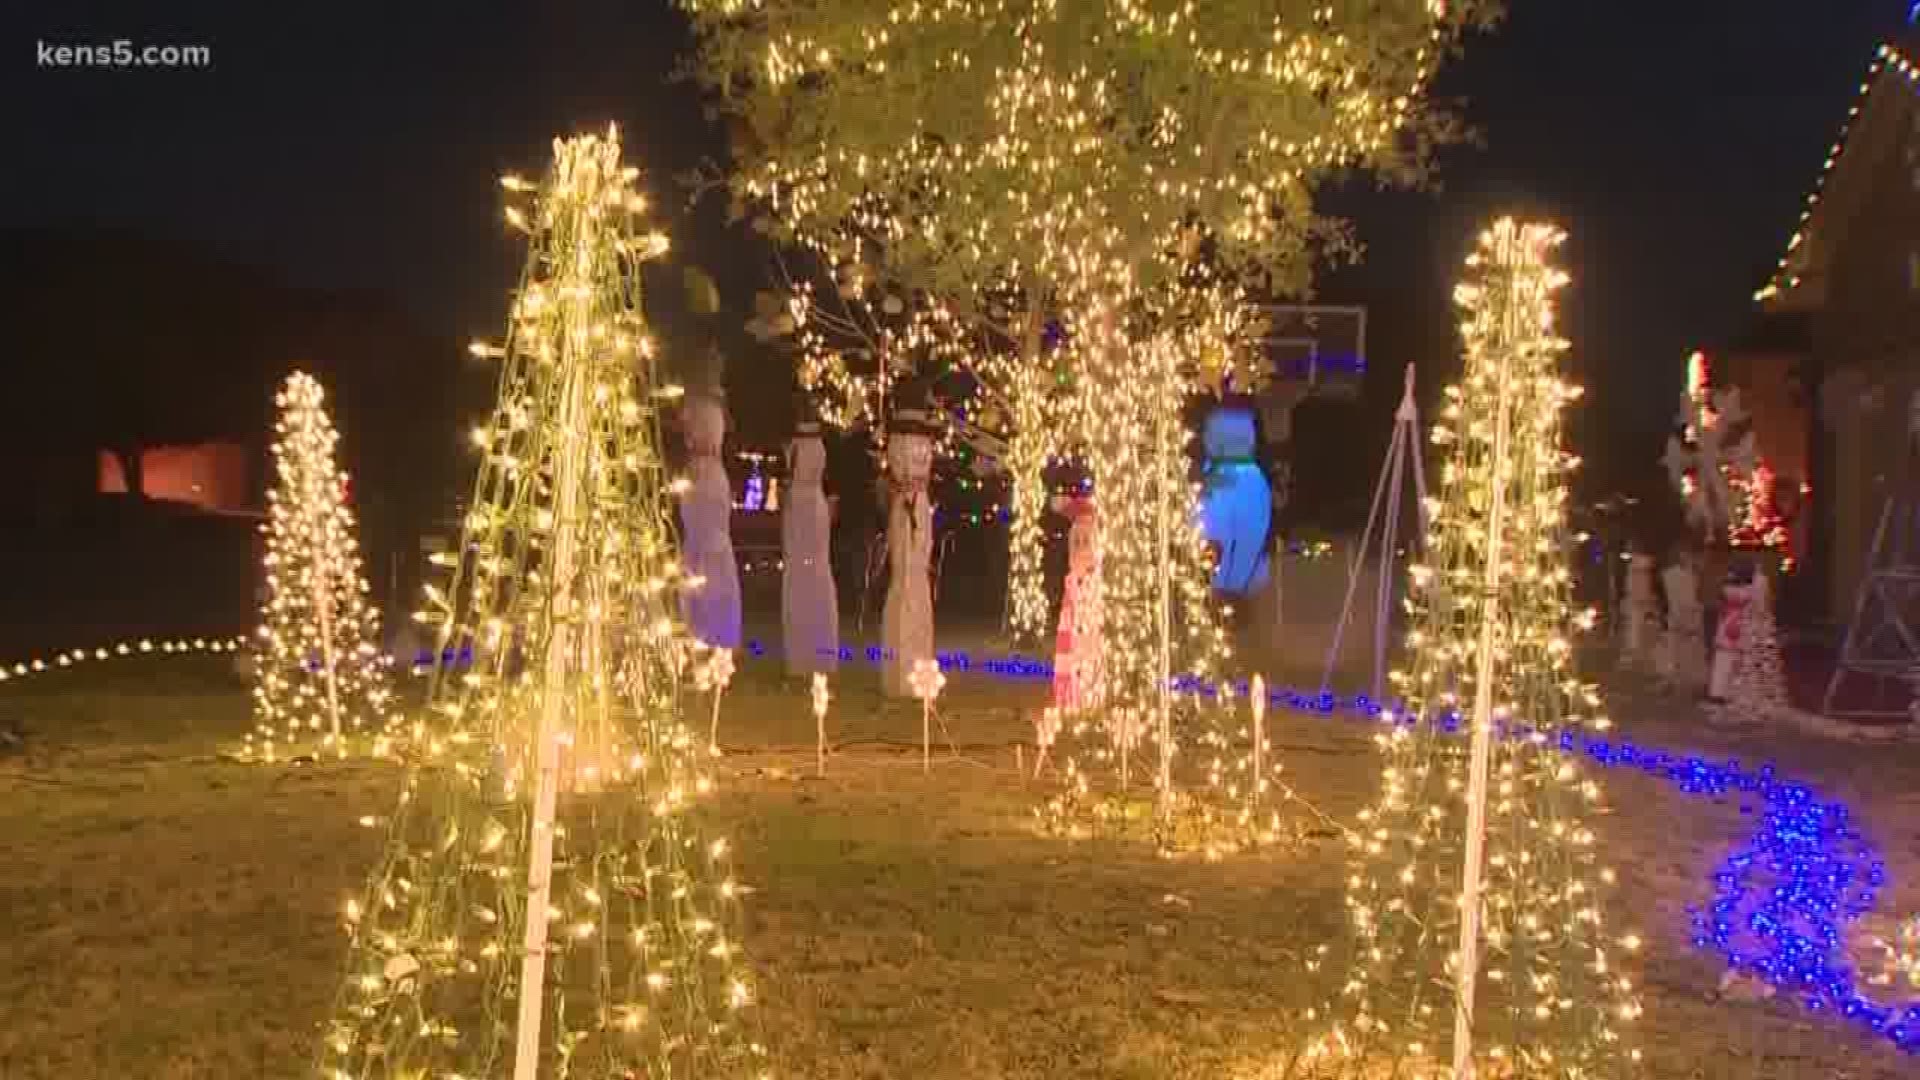 On the corner of Shadow Knolls in Boerne stands the 'Hinojosa Family Lights' display that hundreds of people line up to see every year. Eyewitness News reporter Roxie Bustamante has more.